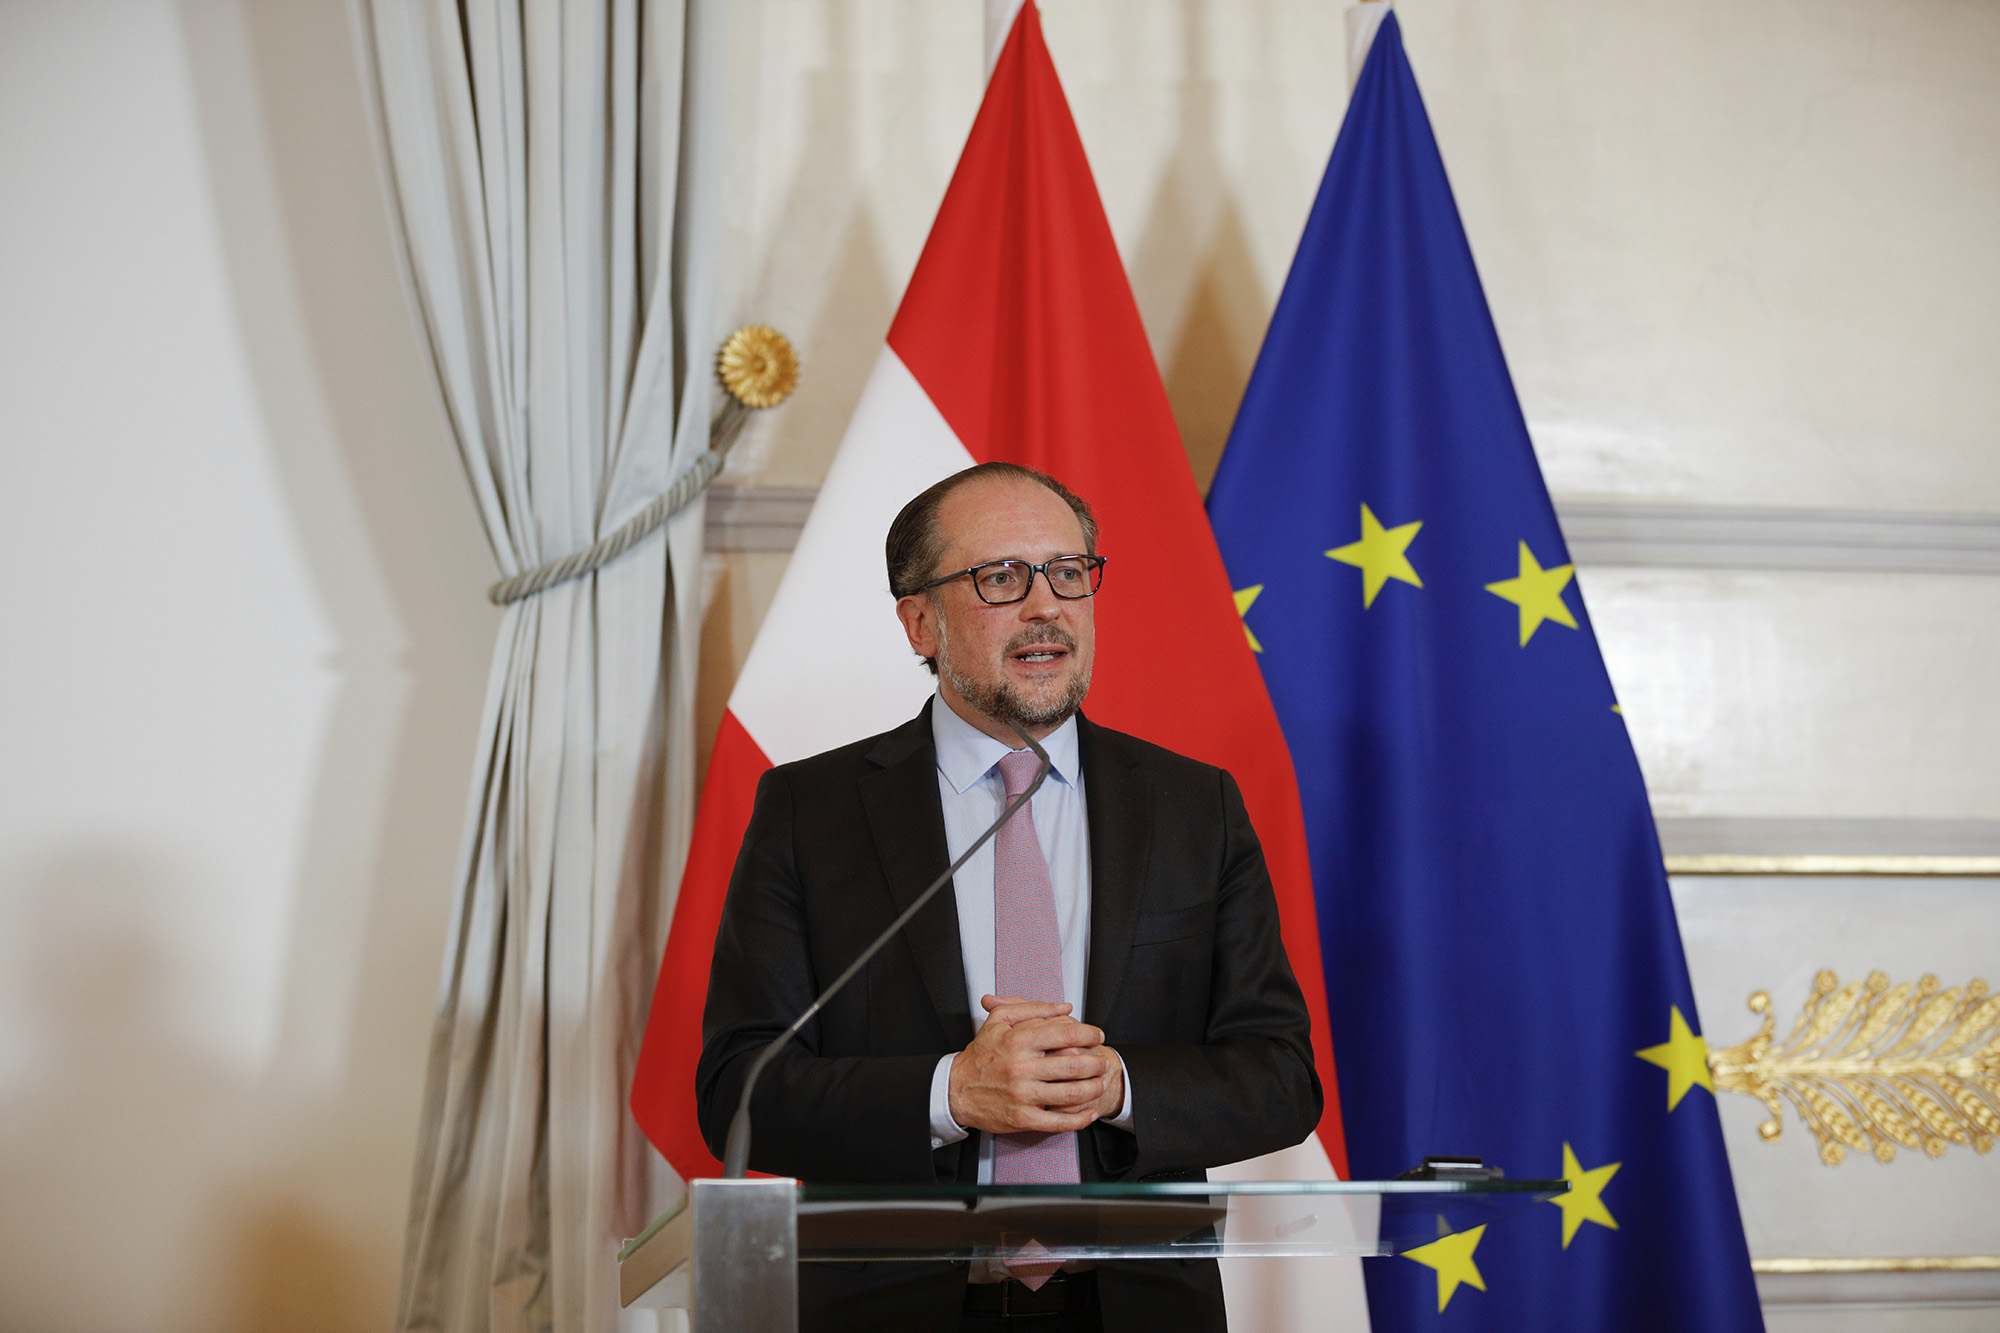 Austrian Foreign Minister Alexander Schallenberg addresses the media during a press conference at the Federal Chancellery in Vienna, Austria, on May 11.